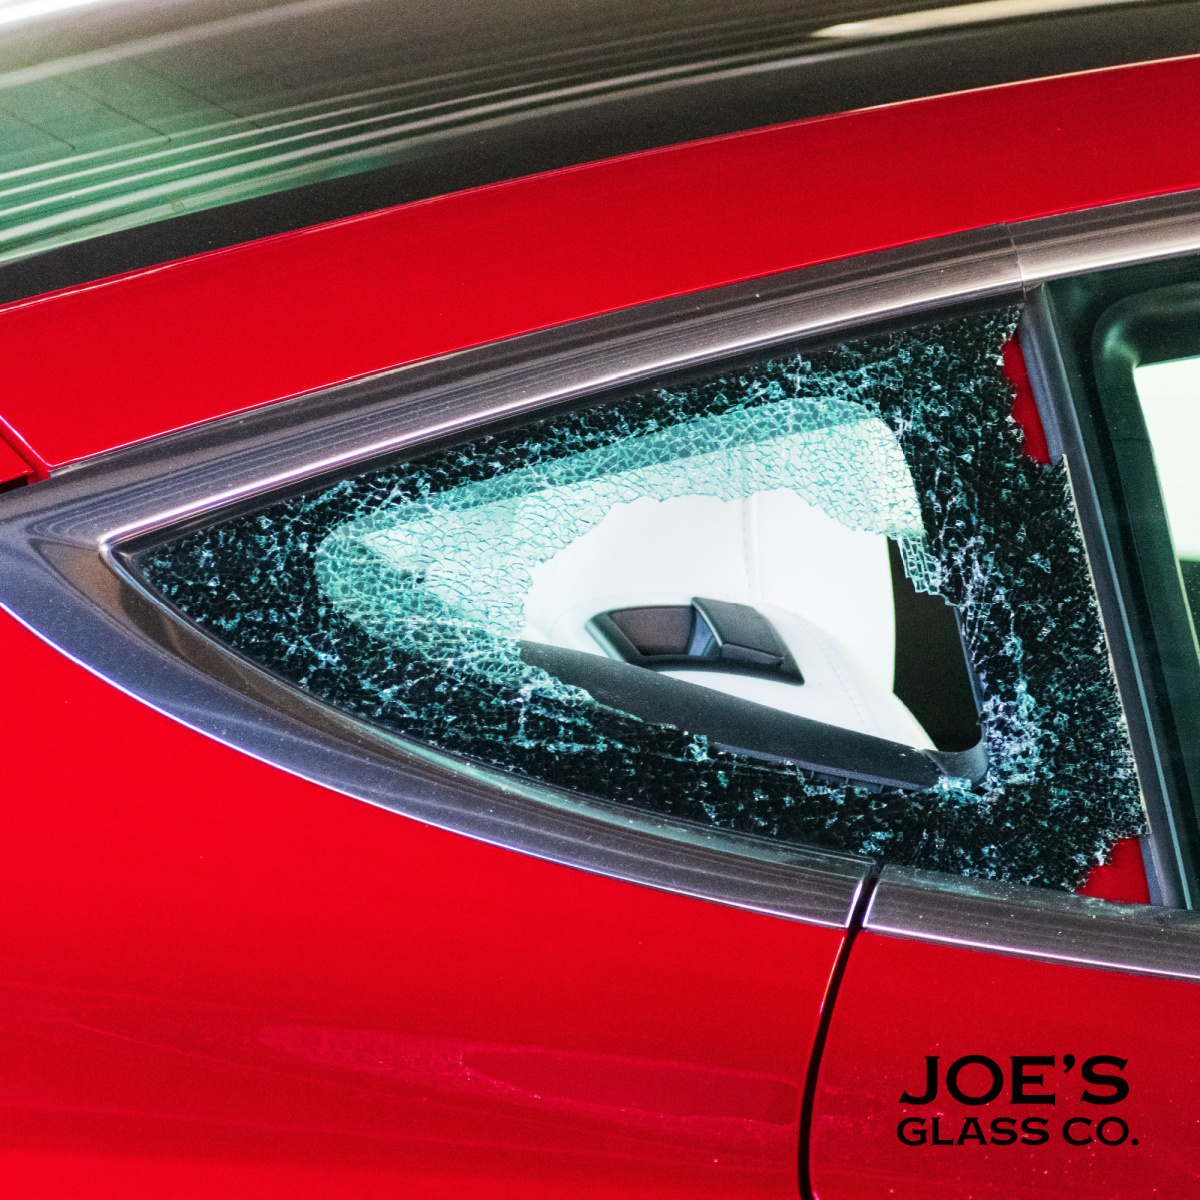 When Does Auto Quarter Glass Replacement Become a Necessity for Your Dinged-Up Automobile?